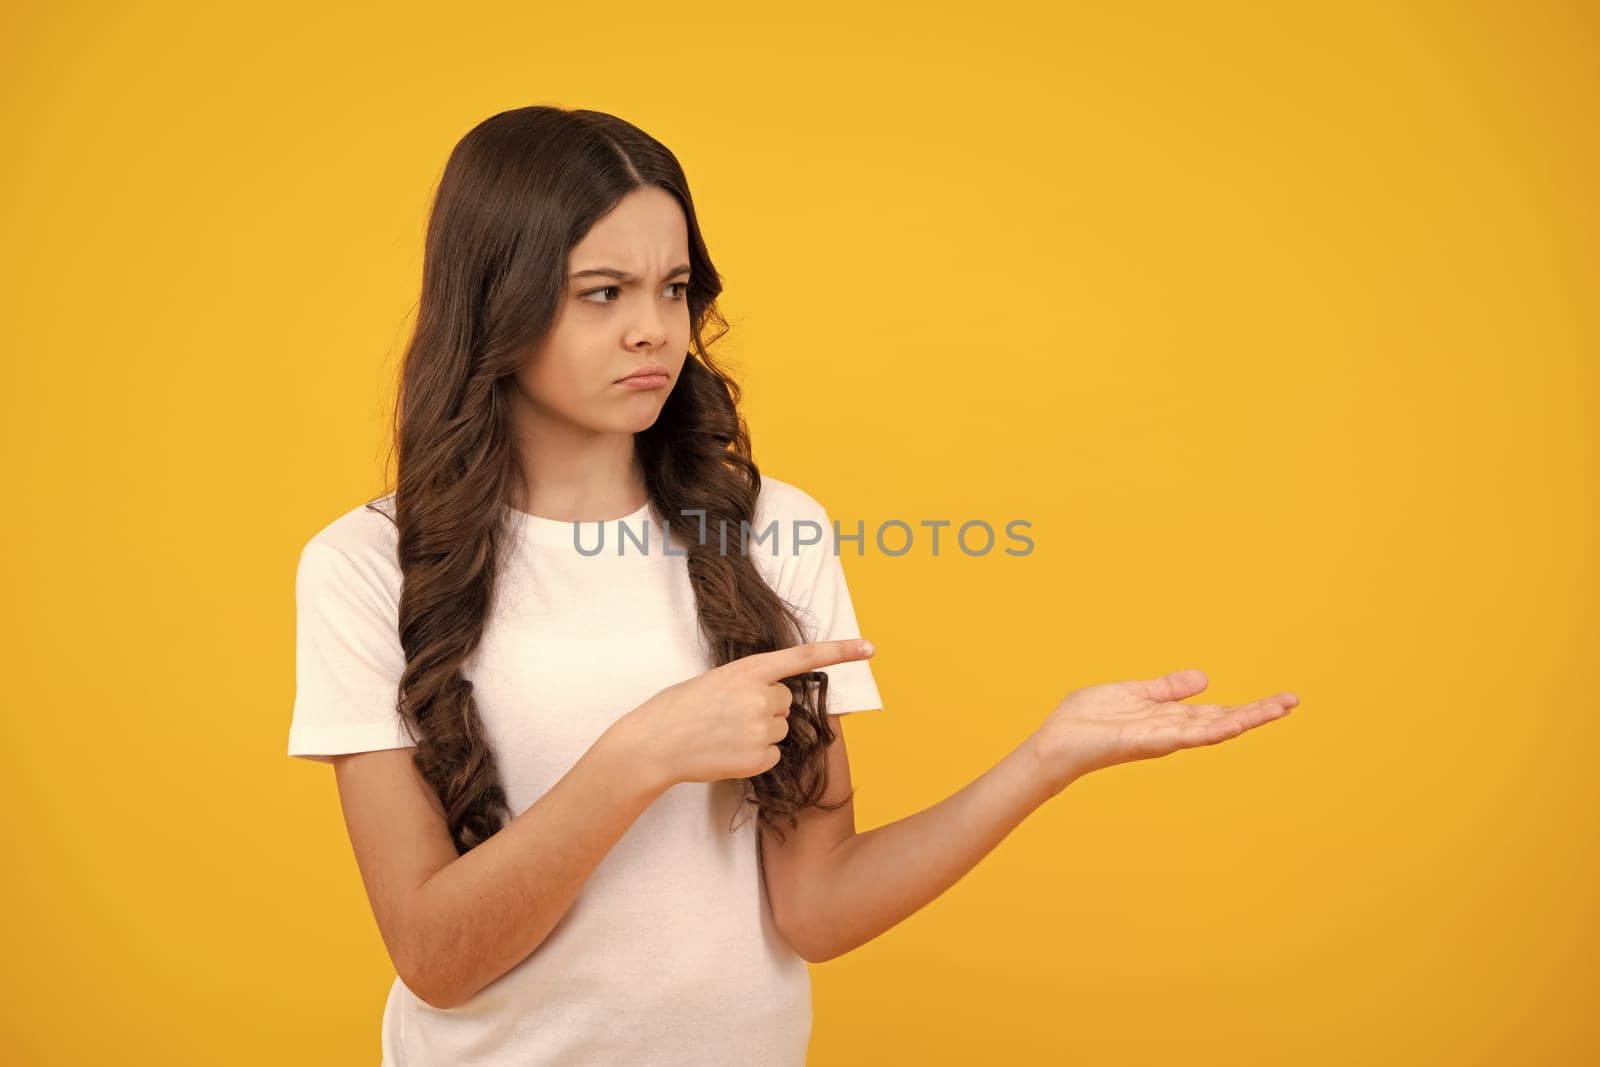 Unhappy sad teenager girl. Portrait of cute teenager child girl pointing hand showing adverts with copy space over yellow background. by RedFoxStudio